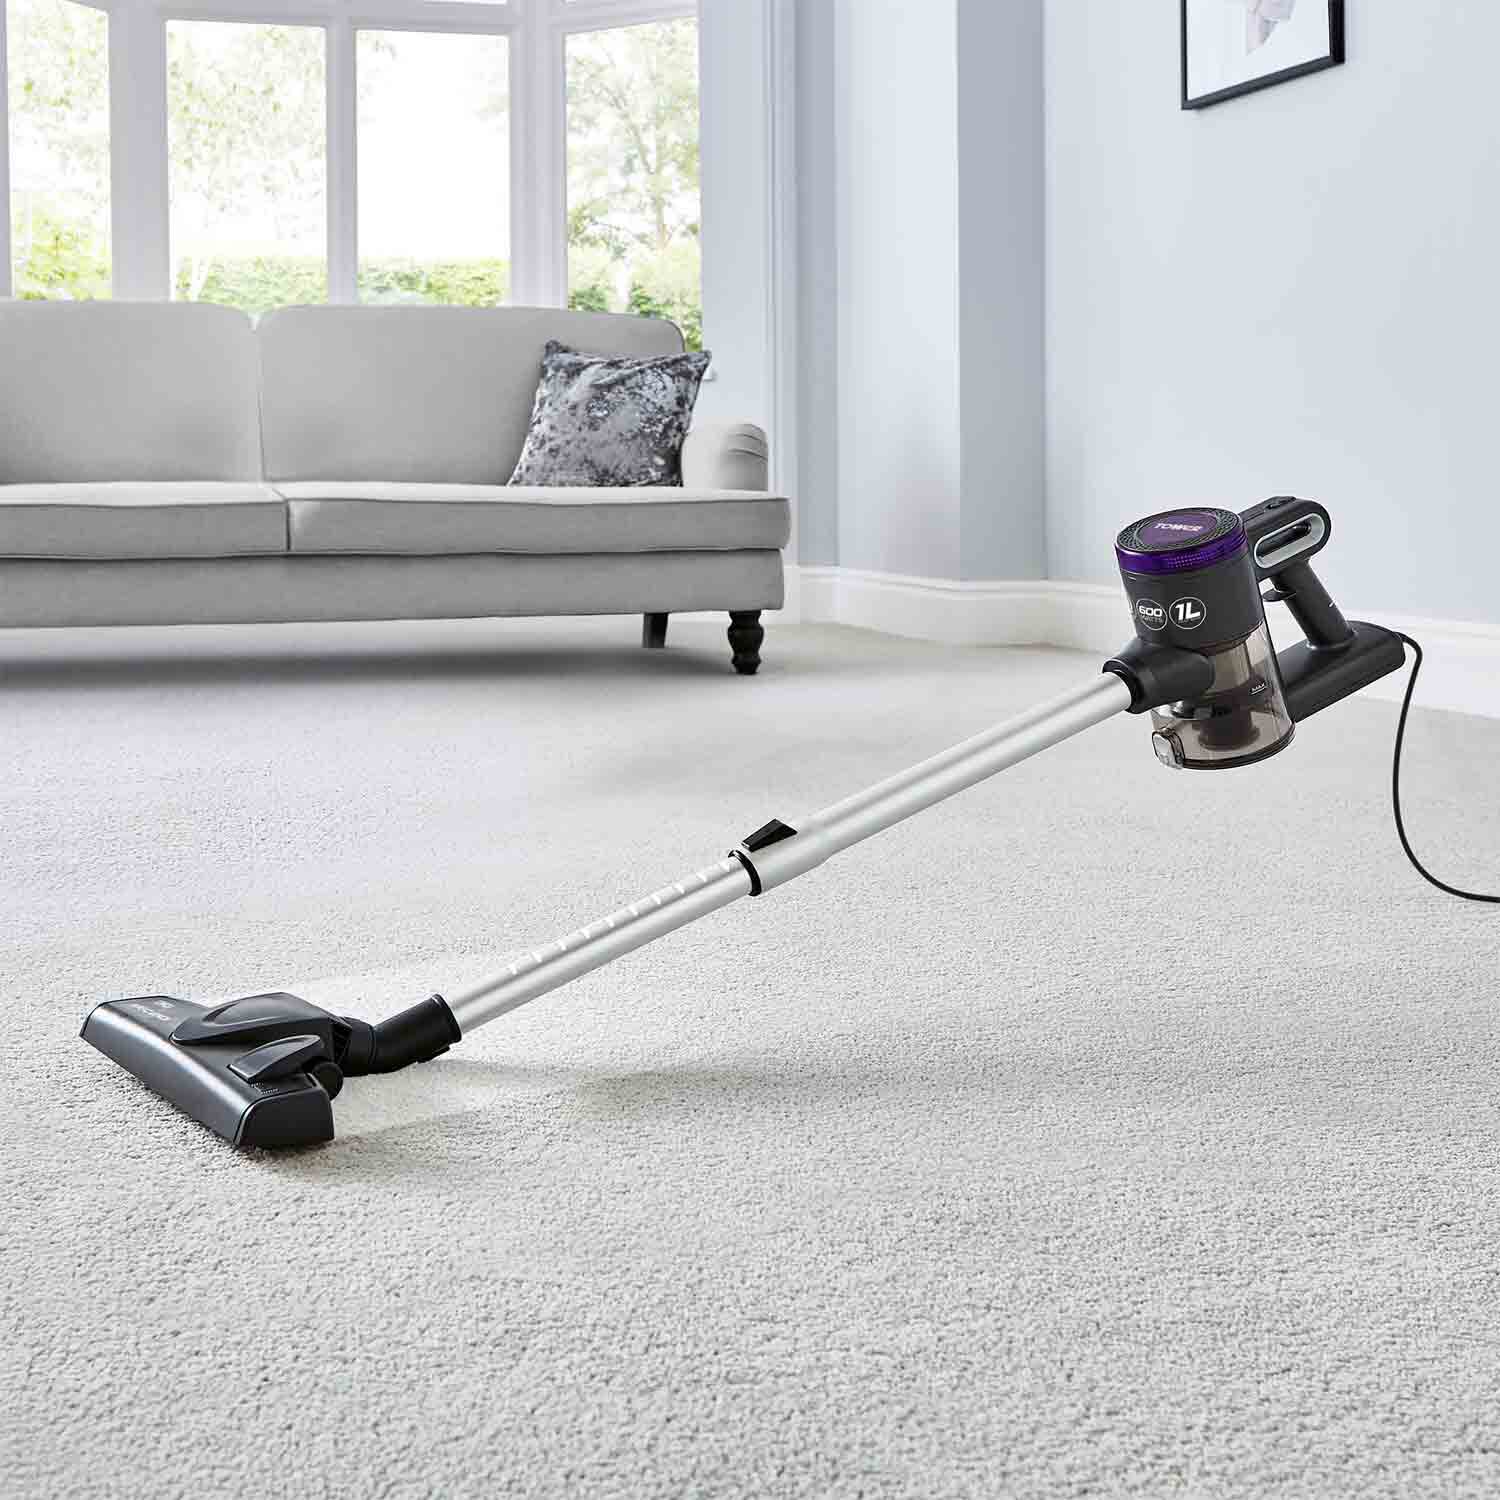 https://www.homestoreandmore.ie/dw/image/v2/BCBN_PRD/on/demandware.static/-/Sites-master/default/dw21932c7a/images/Tower-XEC20-3-in-1-Corded-Vacuum-Cleaner-vacuum-cleaners-129668-hi-res-8.jpg?sw=1500